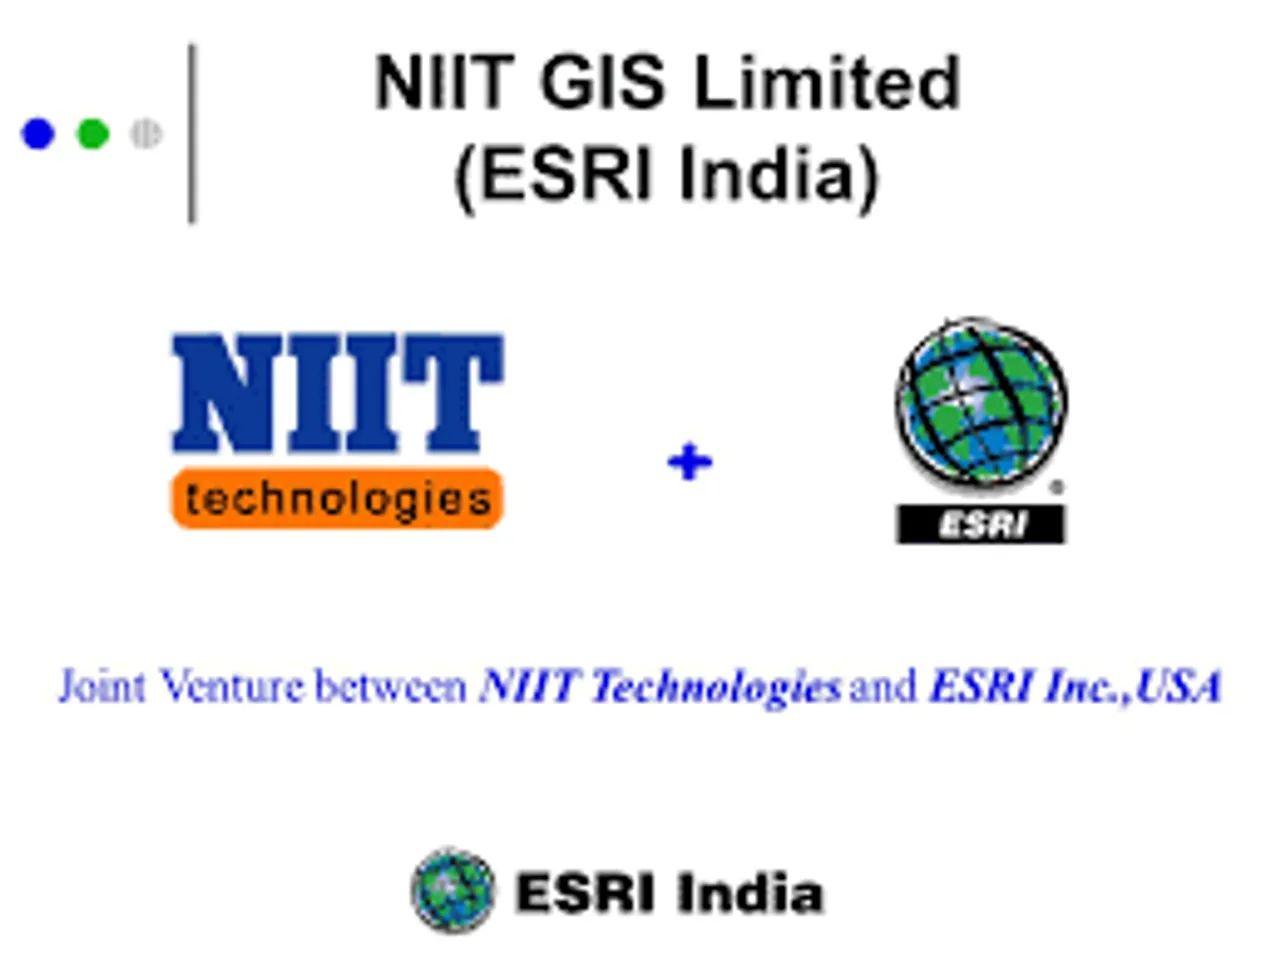 NIIT Tech has signed an agreement for the sale of its entire 88.99% stake in ESRI India Technologies.